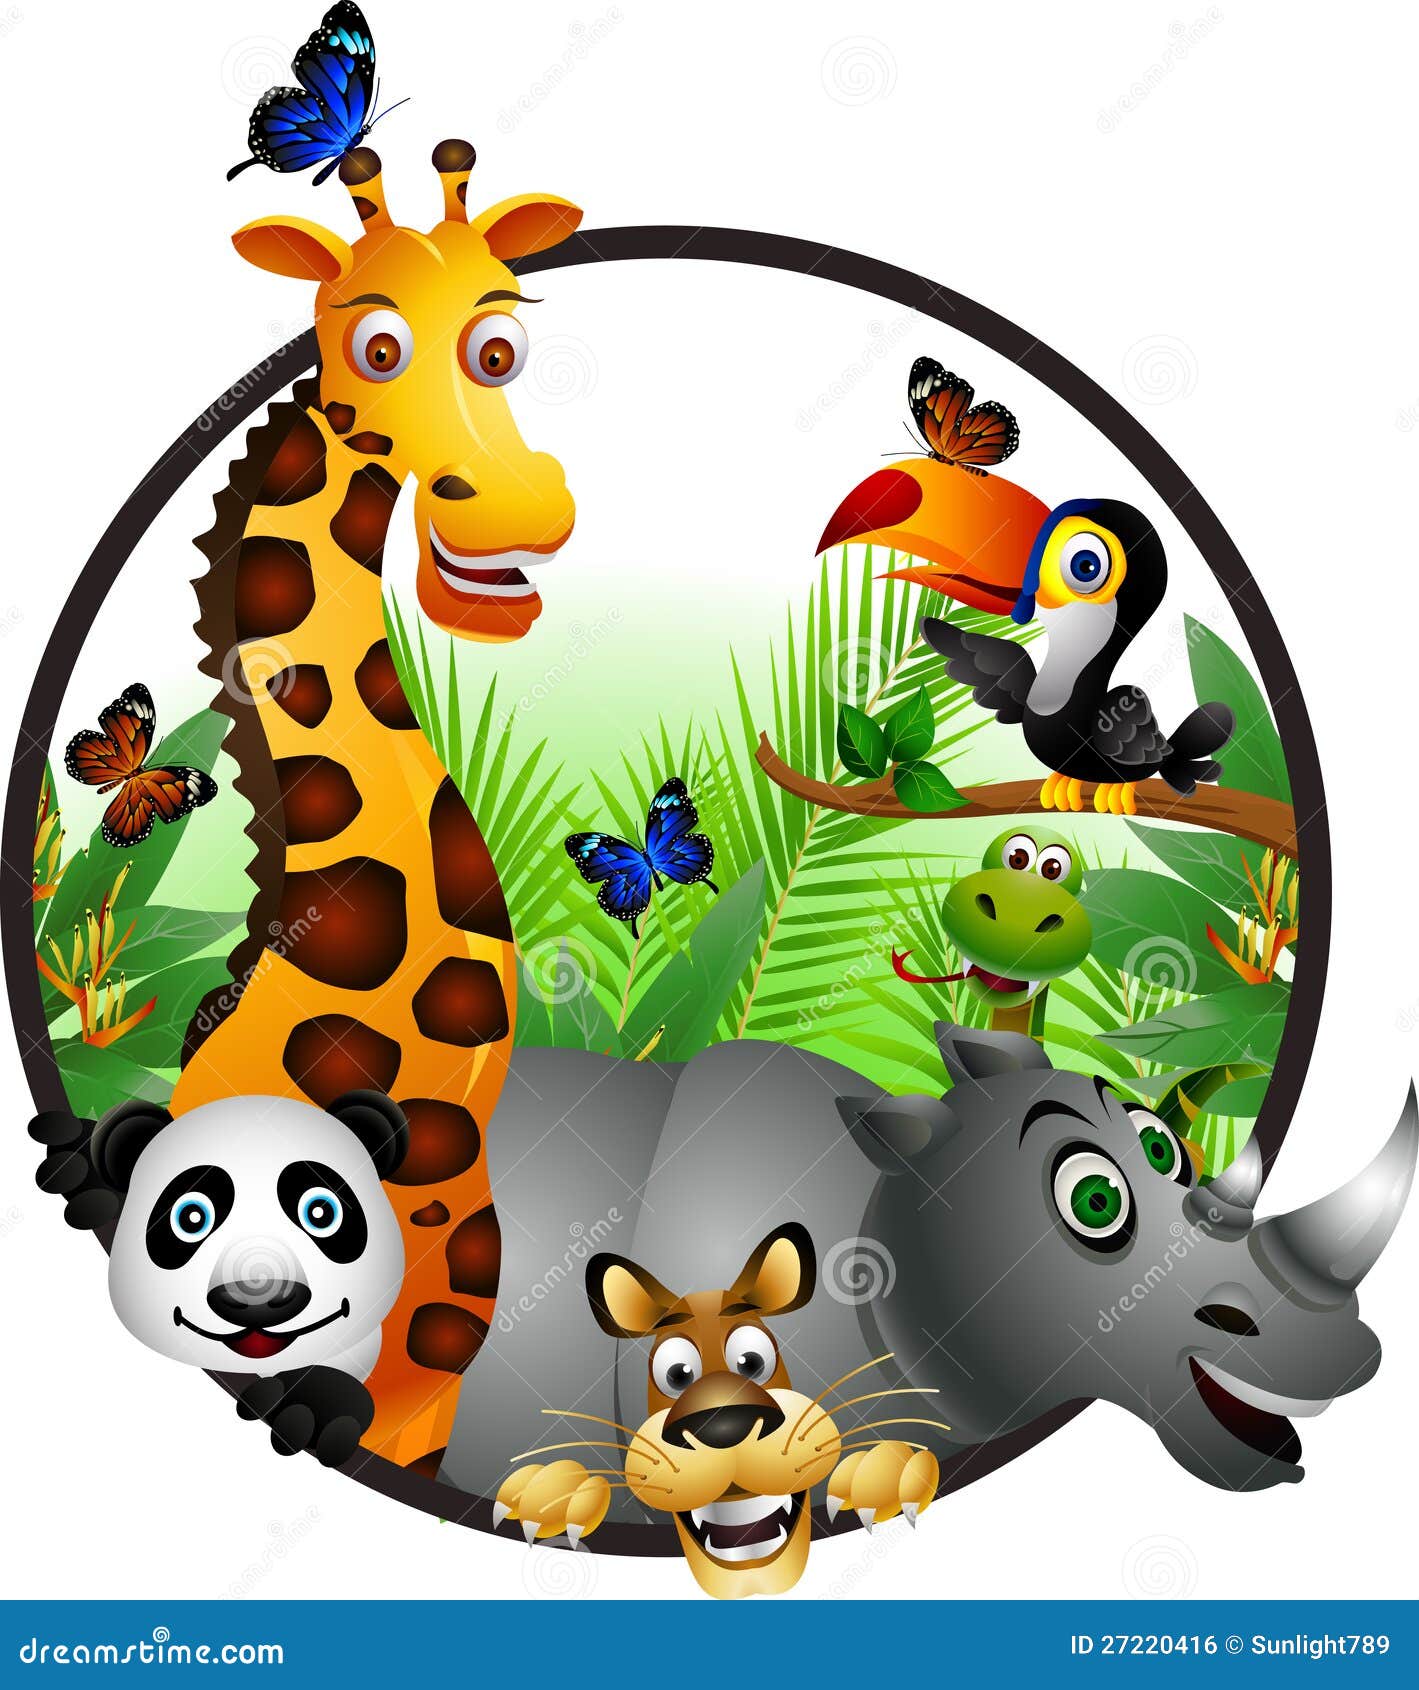 animal clipart collection - photo #12